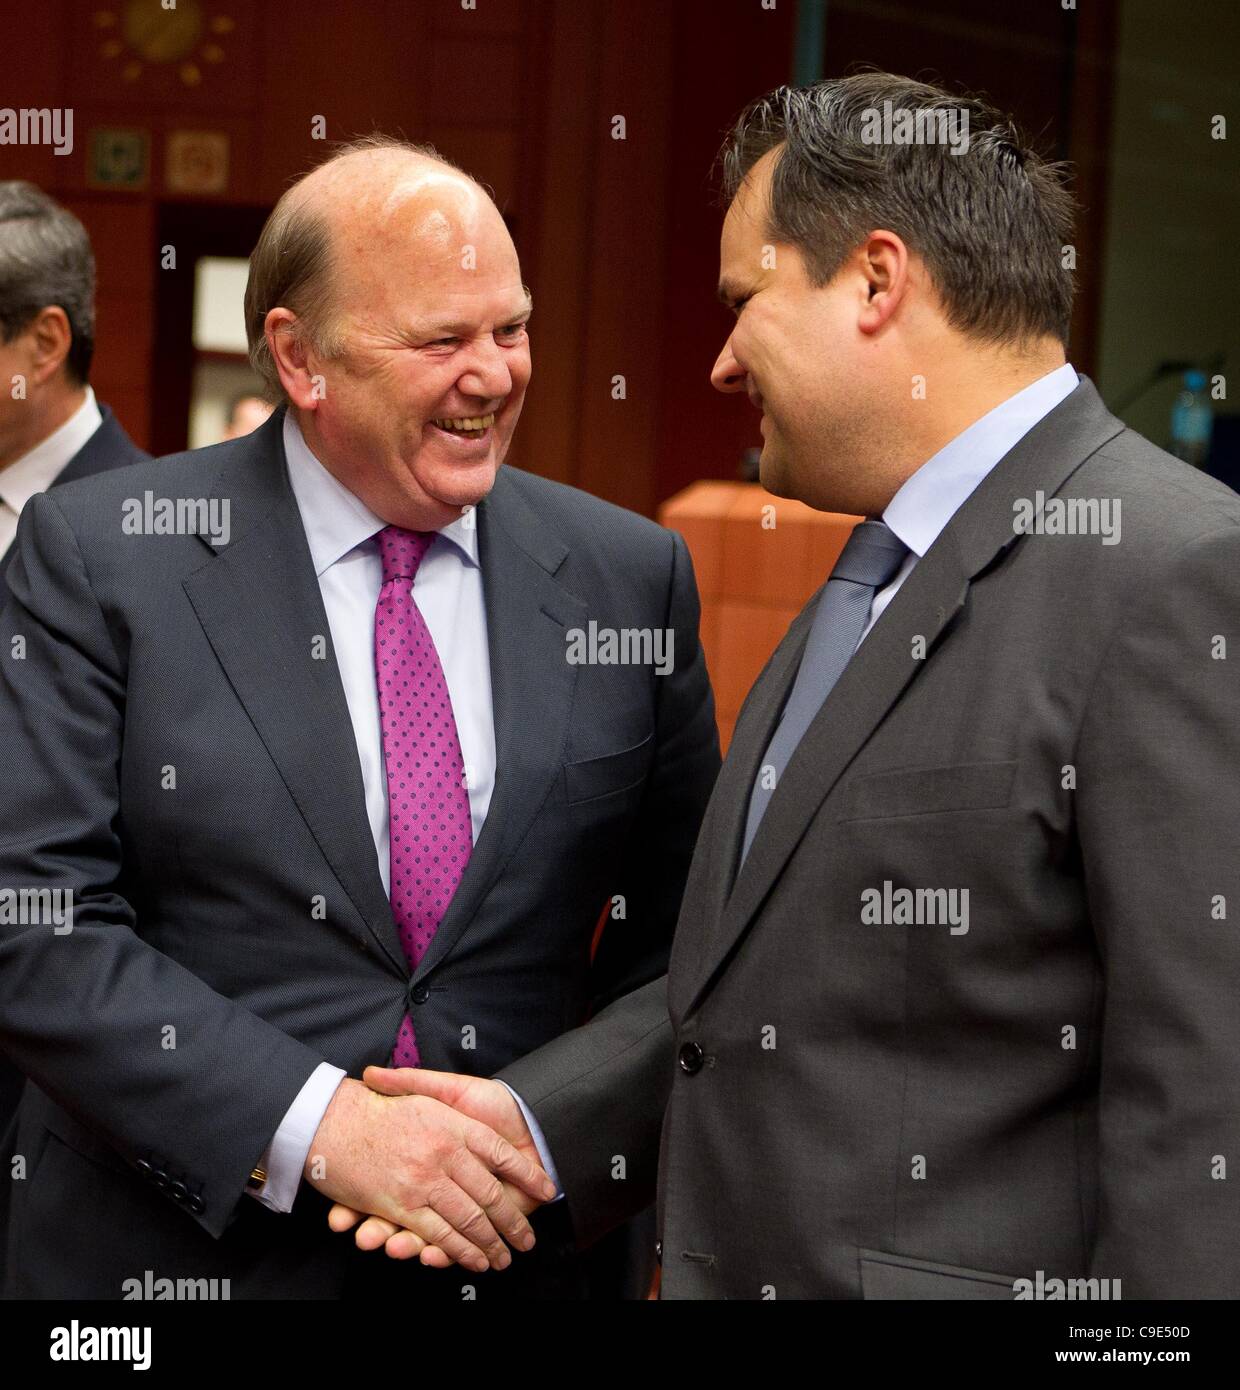 Pictured at the Eurogroup meeting of Finance Ministers of the eurozone were, left to right, Michael Noonan, Finance Minister, Ireland. Jan Kees de Jager, Finance Minister, Netherlands. Stock Photo